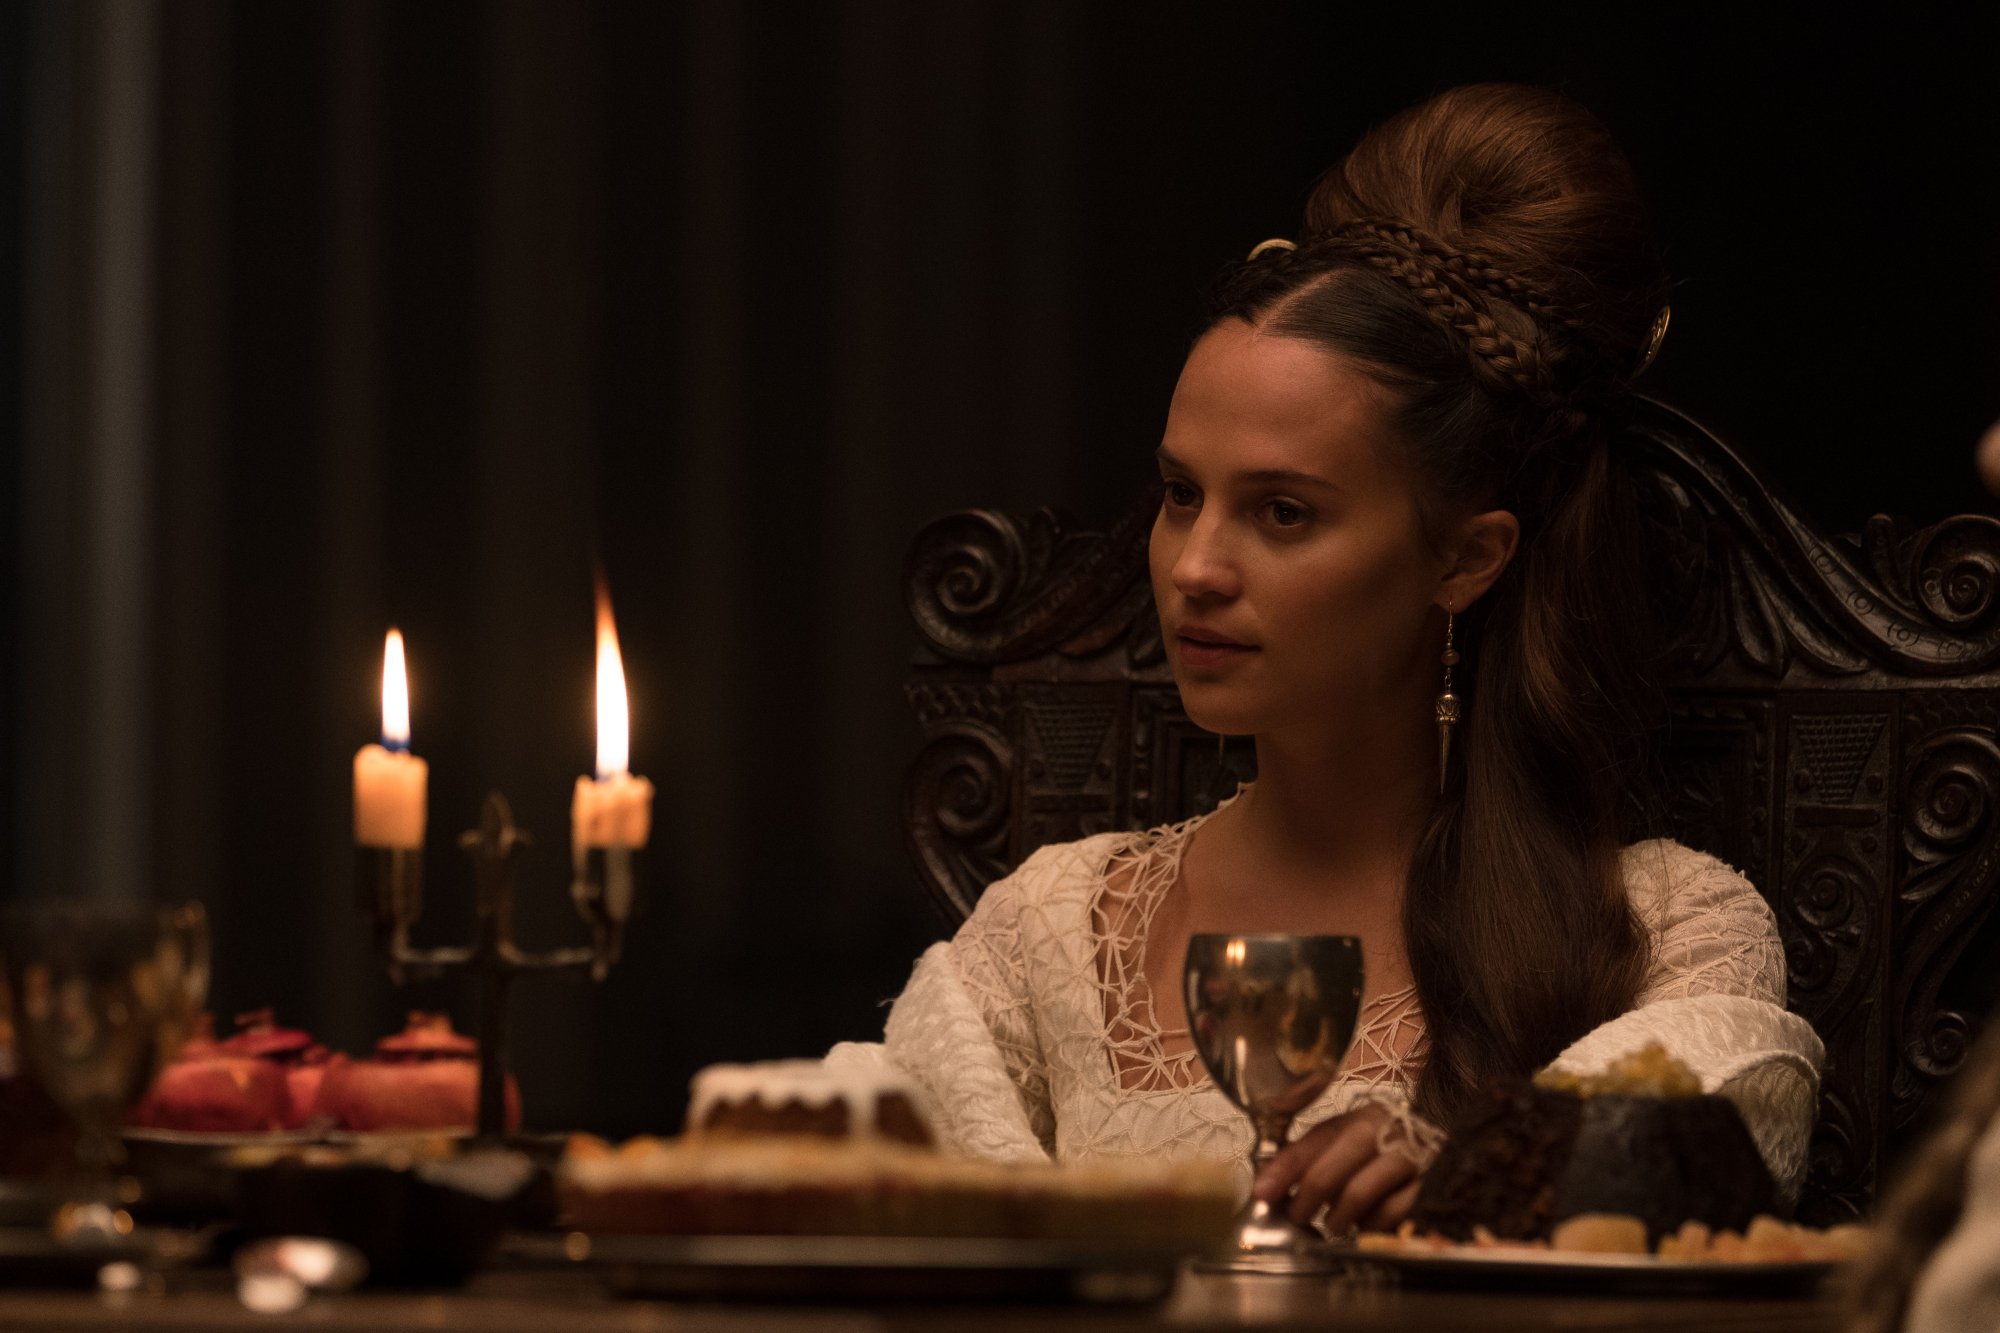 'The Green Knight' actor Alicia Vikander as the Lady sitting at a candlelit table with a wine goblet